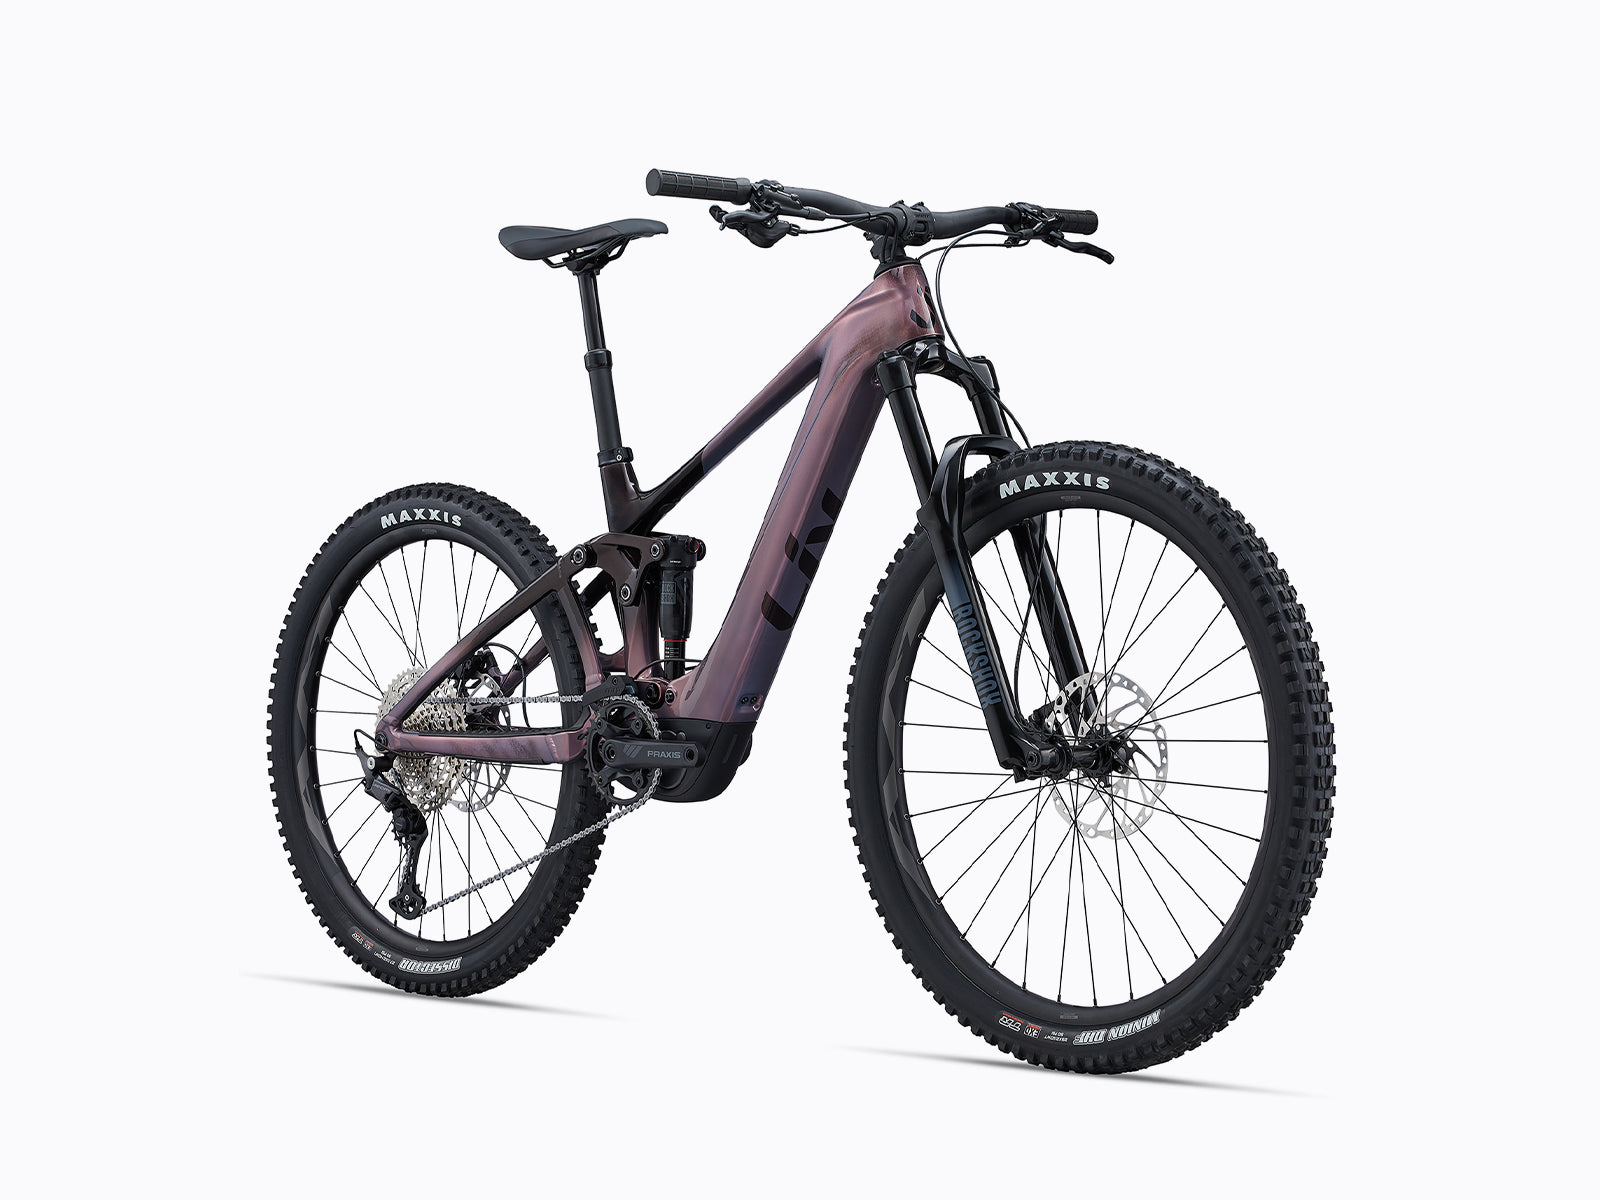 image includes product image for intrigue x advanced e+ elite 3, now available to order on giant bicycles australia